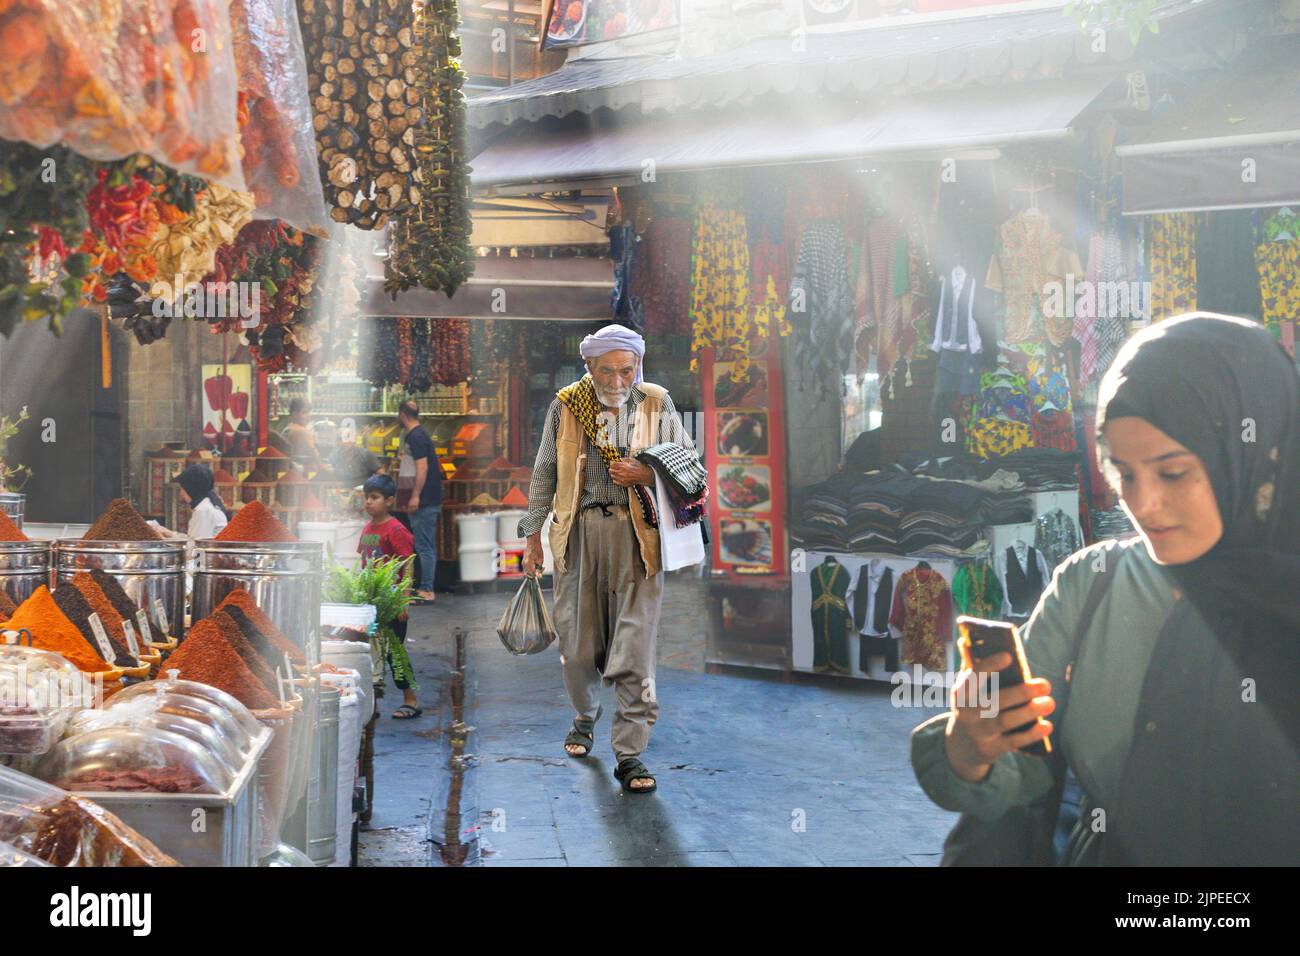 Local woman checking her phone and a local man in traditional clothes walking in the bazaar through the beams of light and smoke in Sanliurfa, Turkey Stock Photo